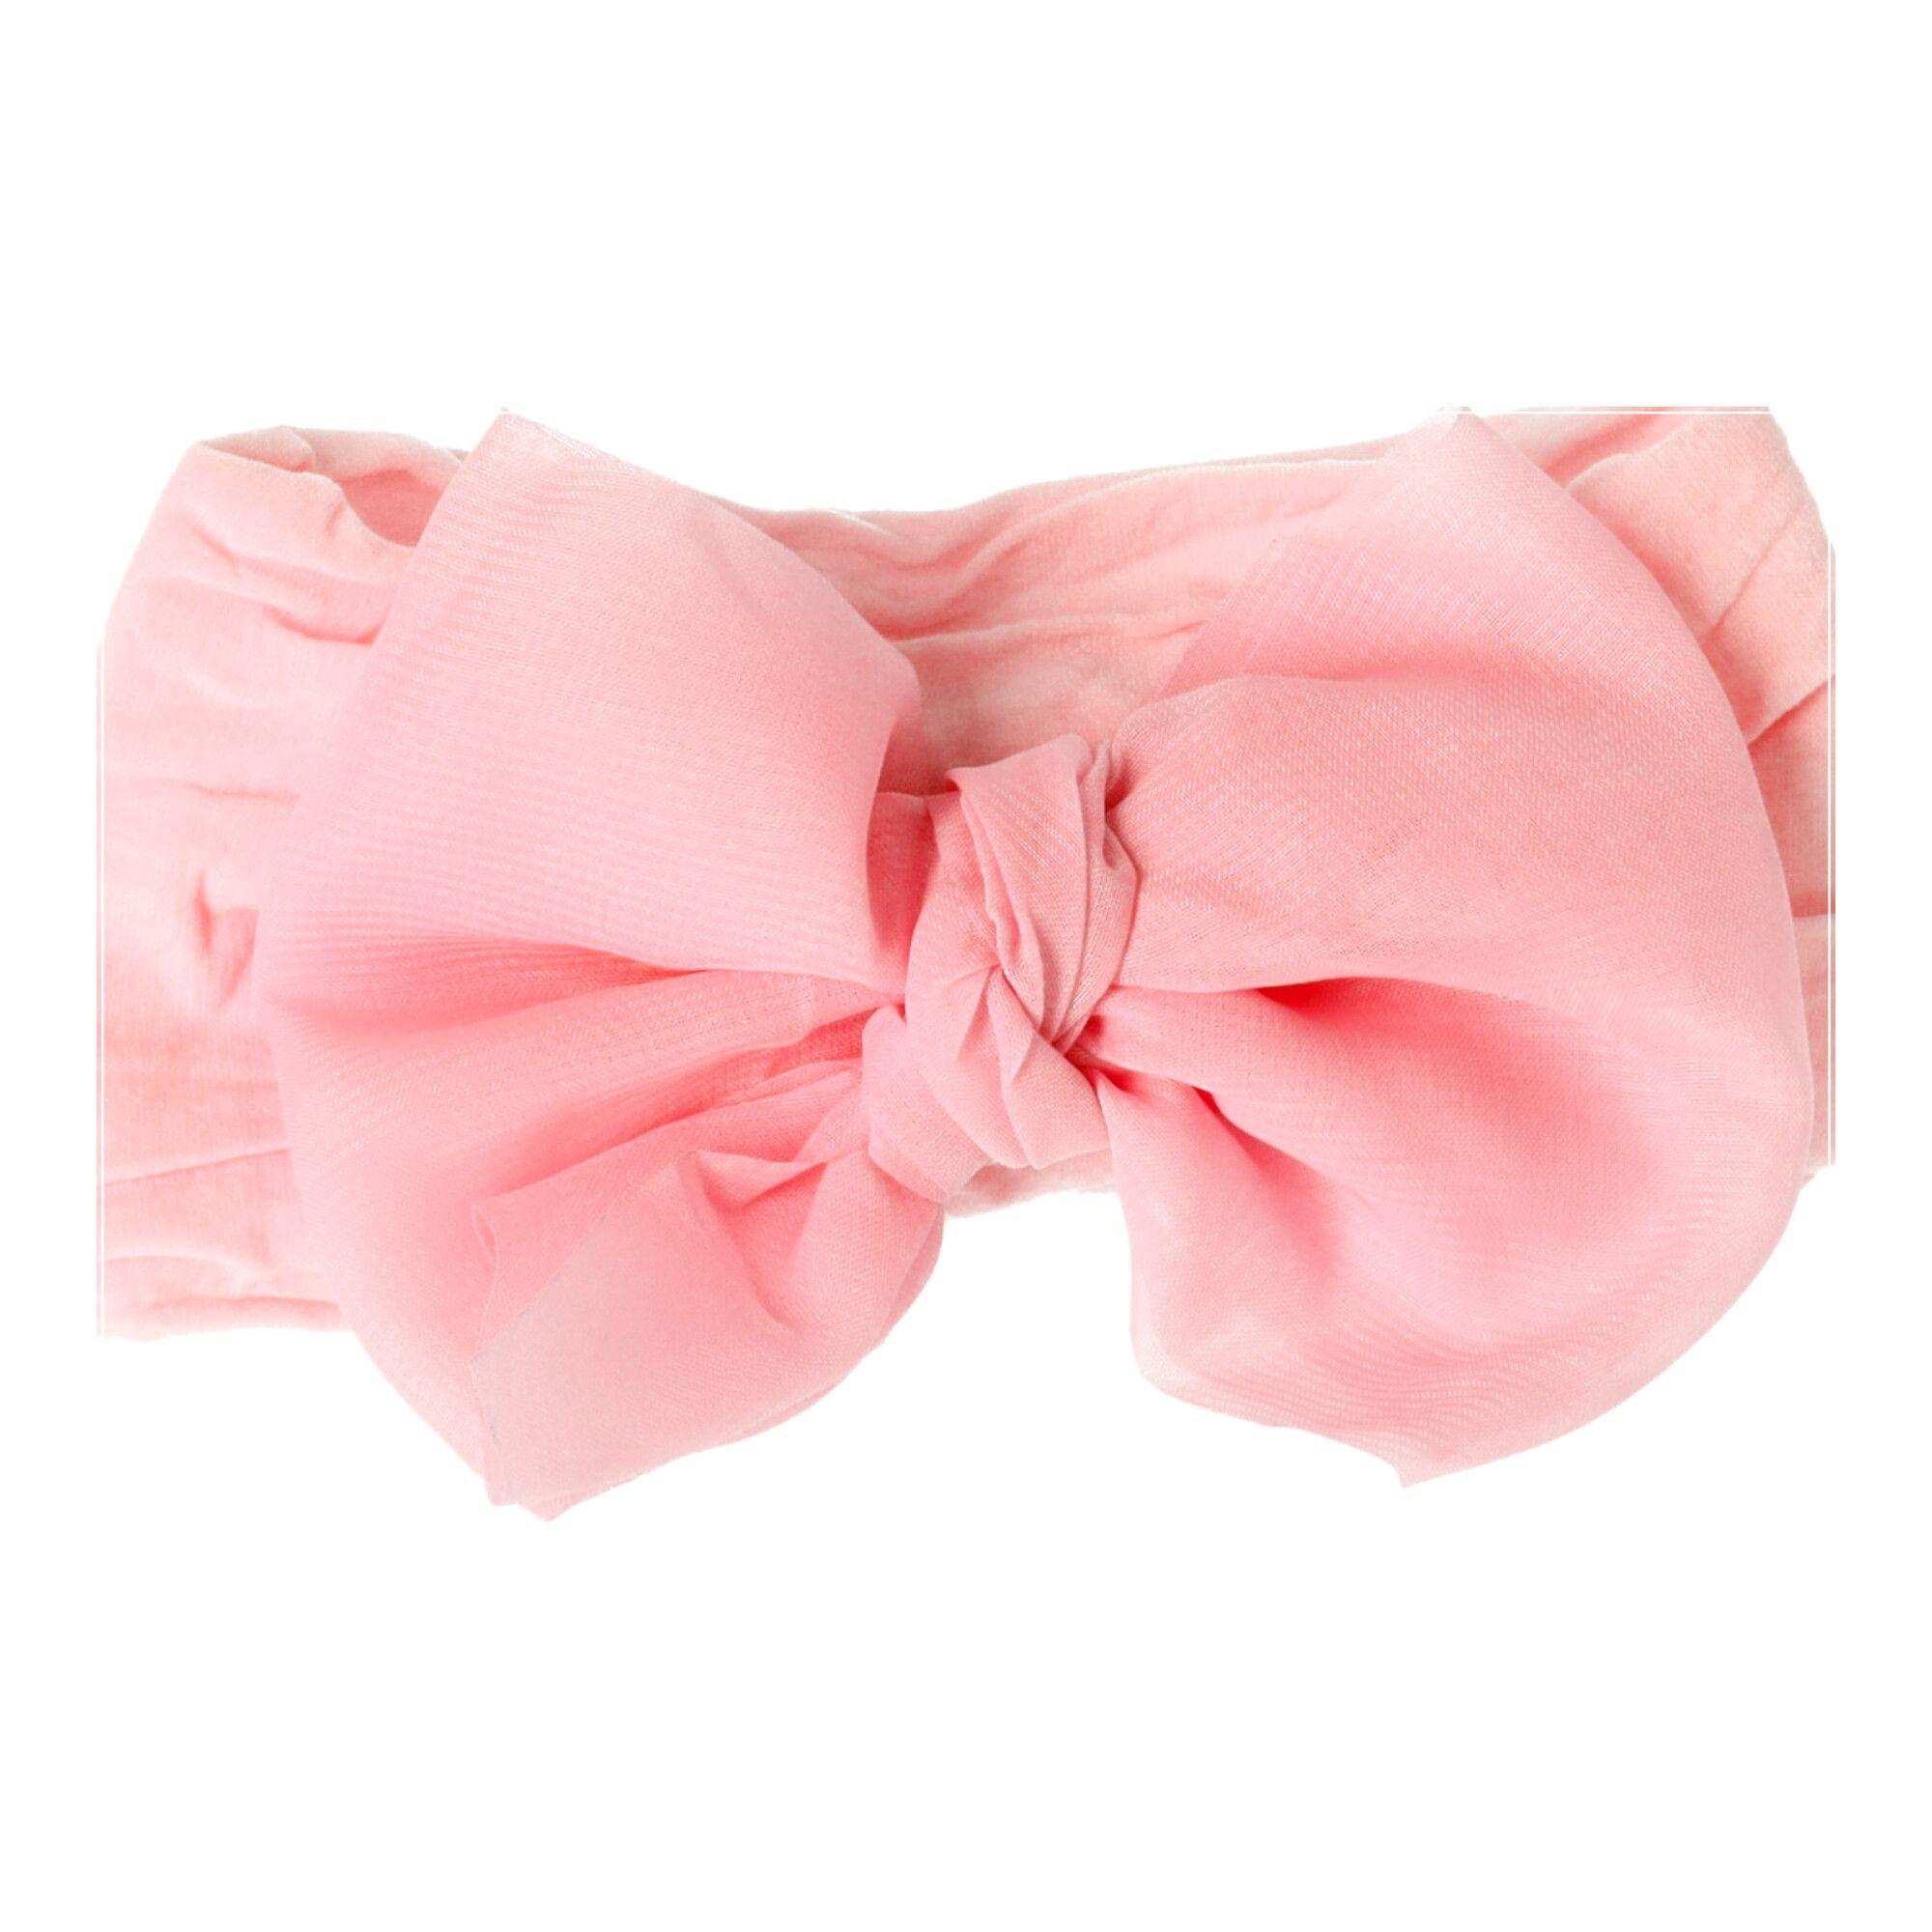 Baby headband with a bow - pink, wide